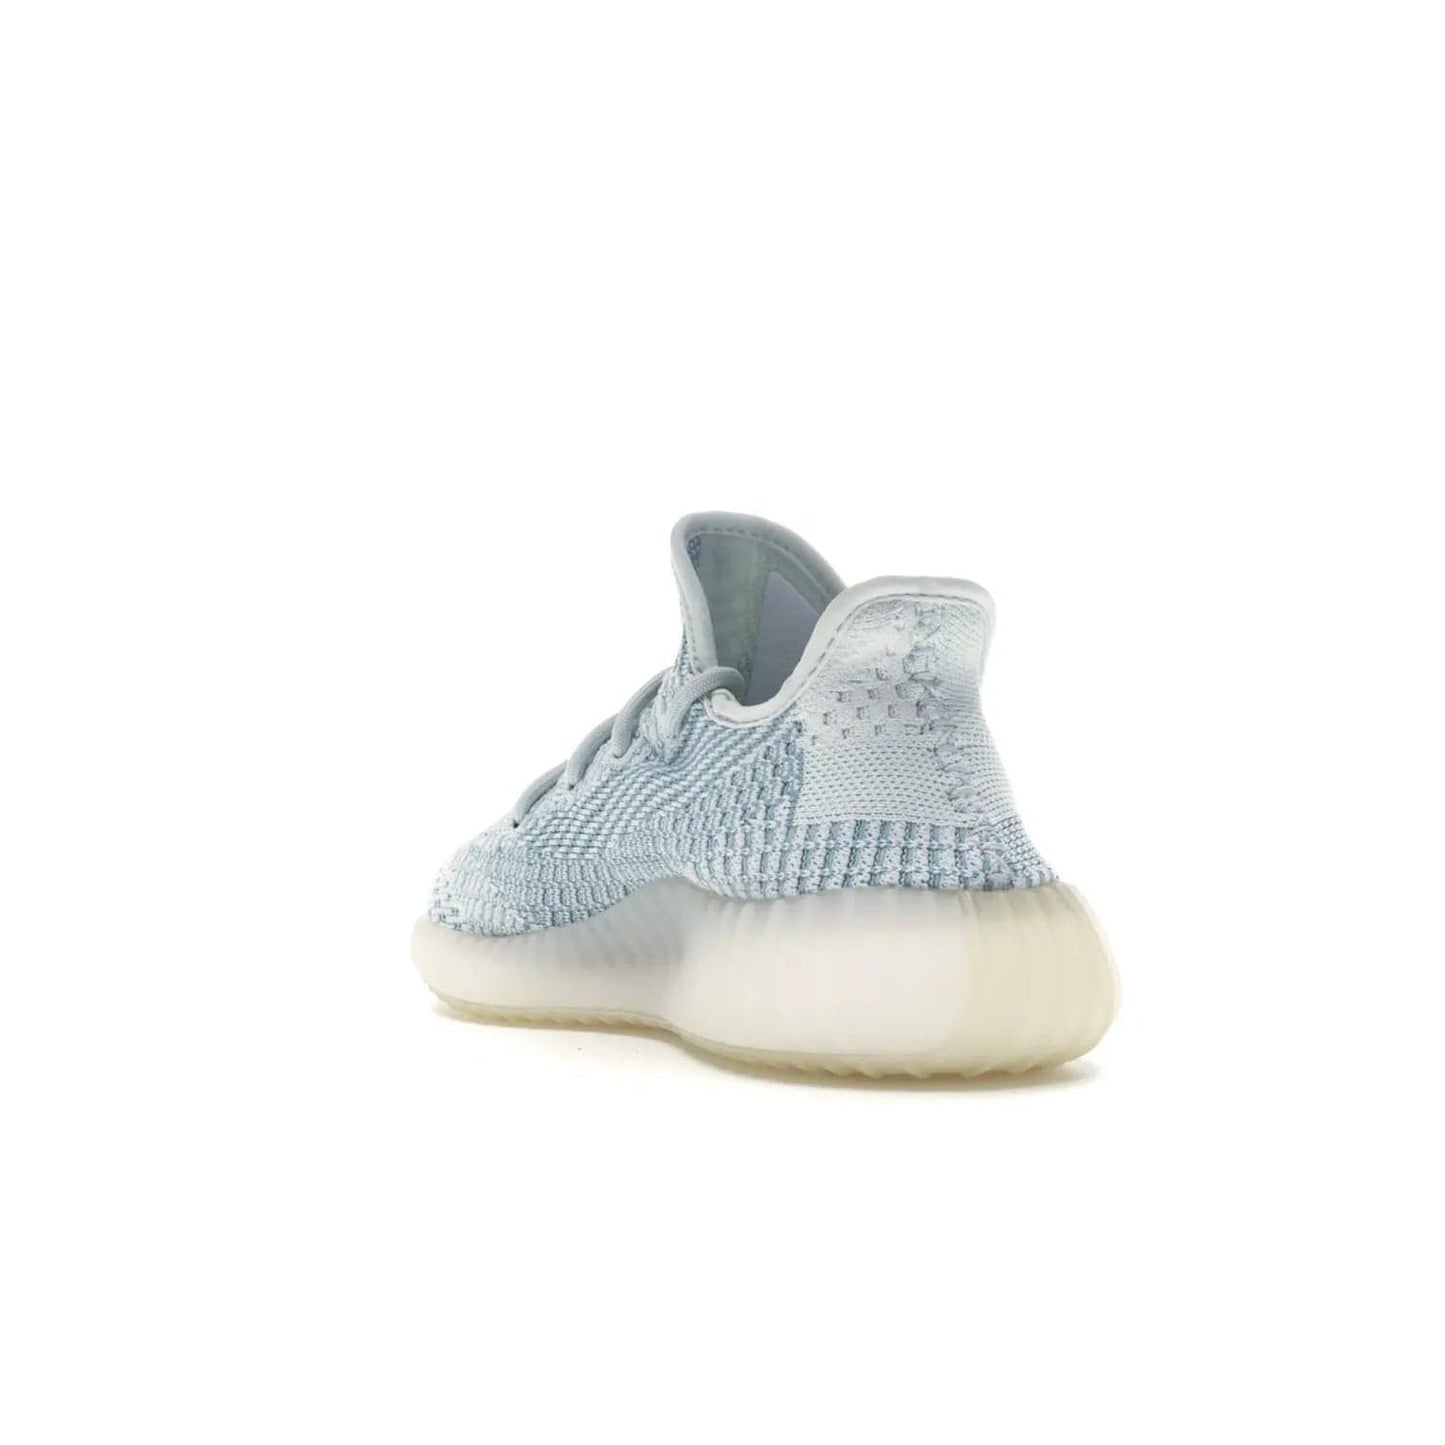 adidas Yeezy Boost 350 V2 Cloud White (Non-Reflective) - Image 25 - Only at www.BallersClubKickz.com - Adidas Yeezy Boost 350 V2 Cloud White (Non-Reflective) features Primeknit fabric and a unique, eye-catching design of cream, bluish-white, and transparent strip. Step out in timeless style with this eye-catching sneaker.